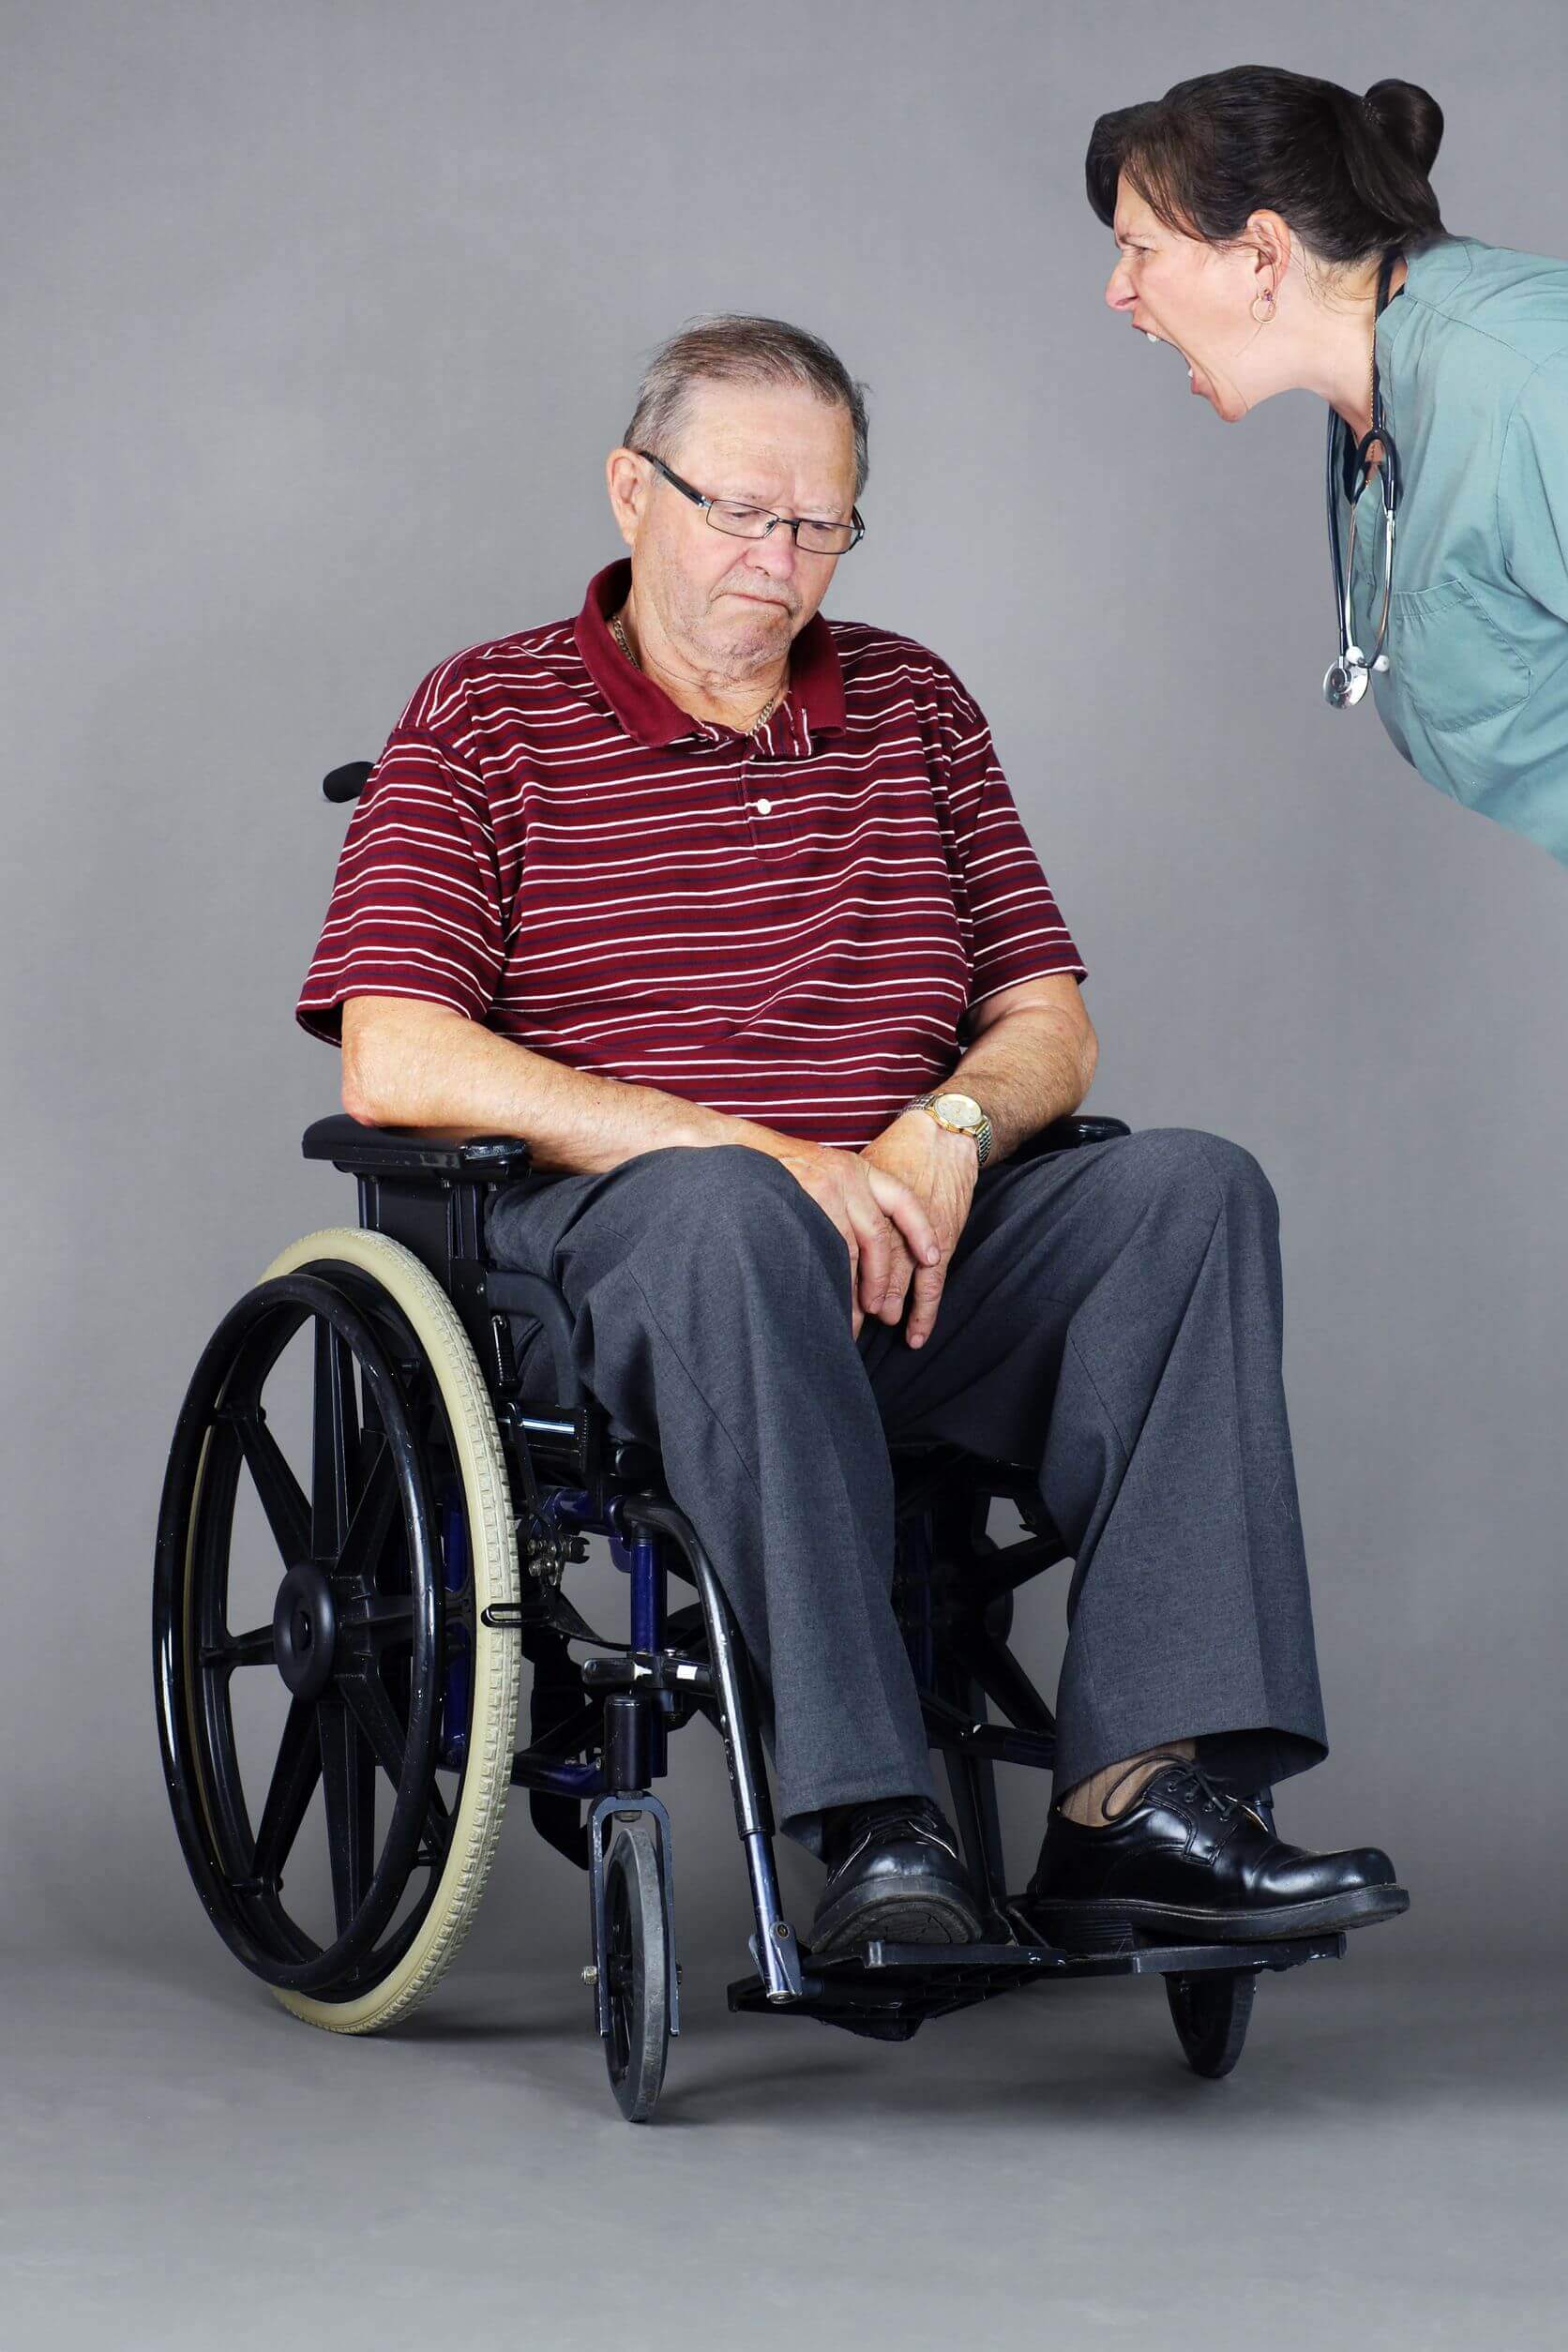 How Are Seniors Psychologically Abused in Nursing Homes?